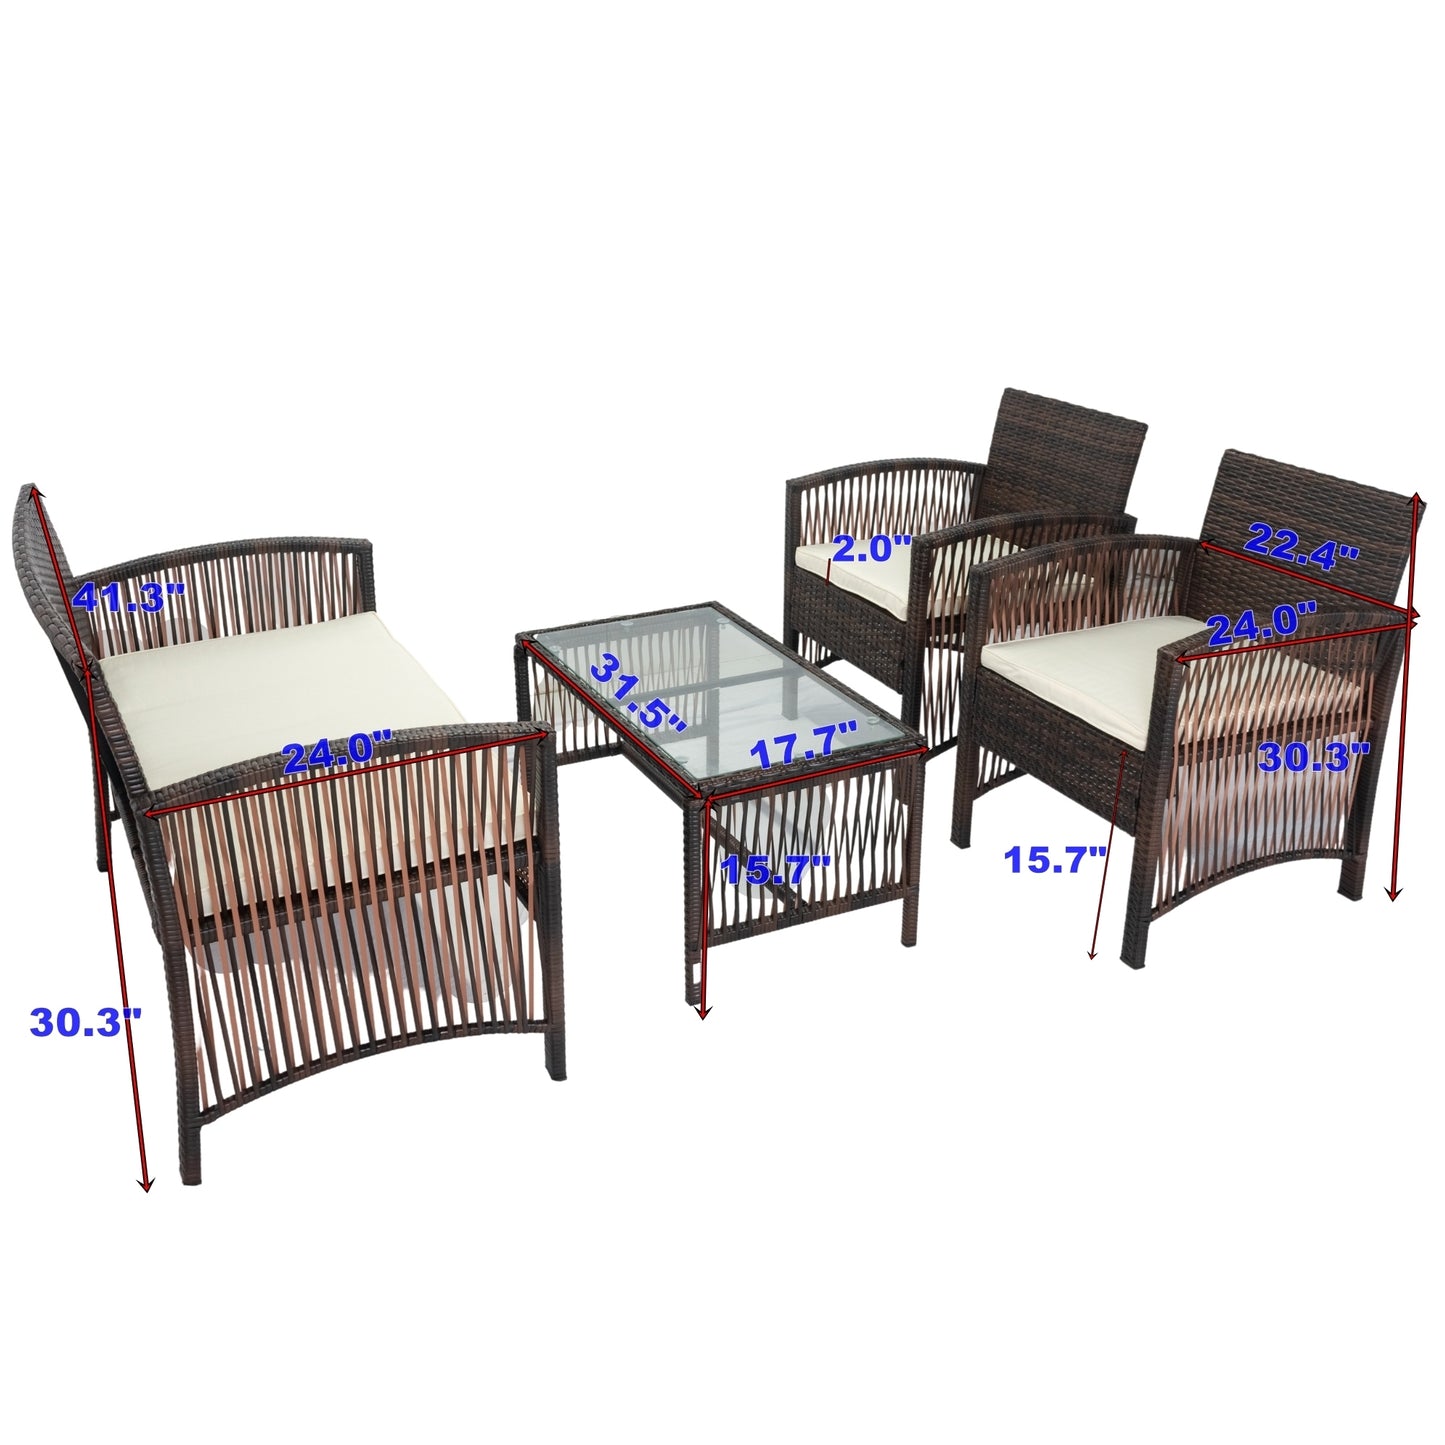 4 PCs Outdoor Patio Furniture Sofa Conversation Sets PE Rattan Wicker Sofa Chair Set Cushioned Seat with Glass Tabletop Coffee Table with Soft Cushions & Tempered Glass Coffee Table